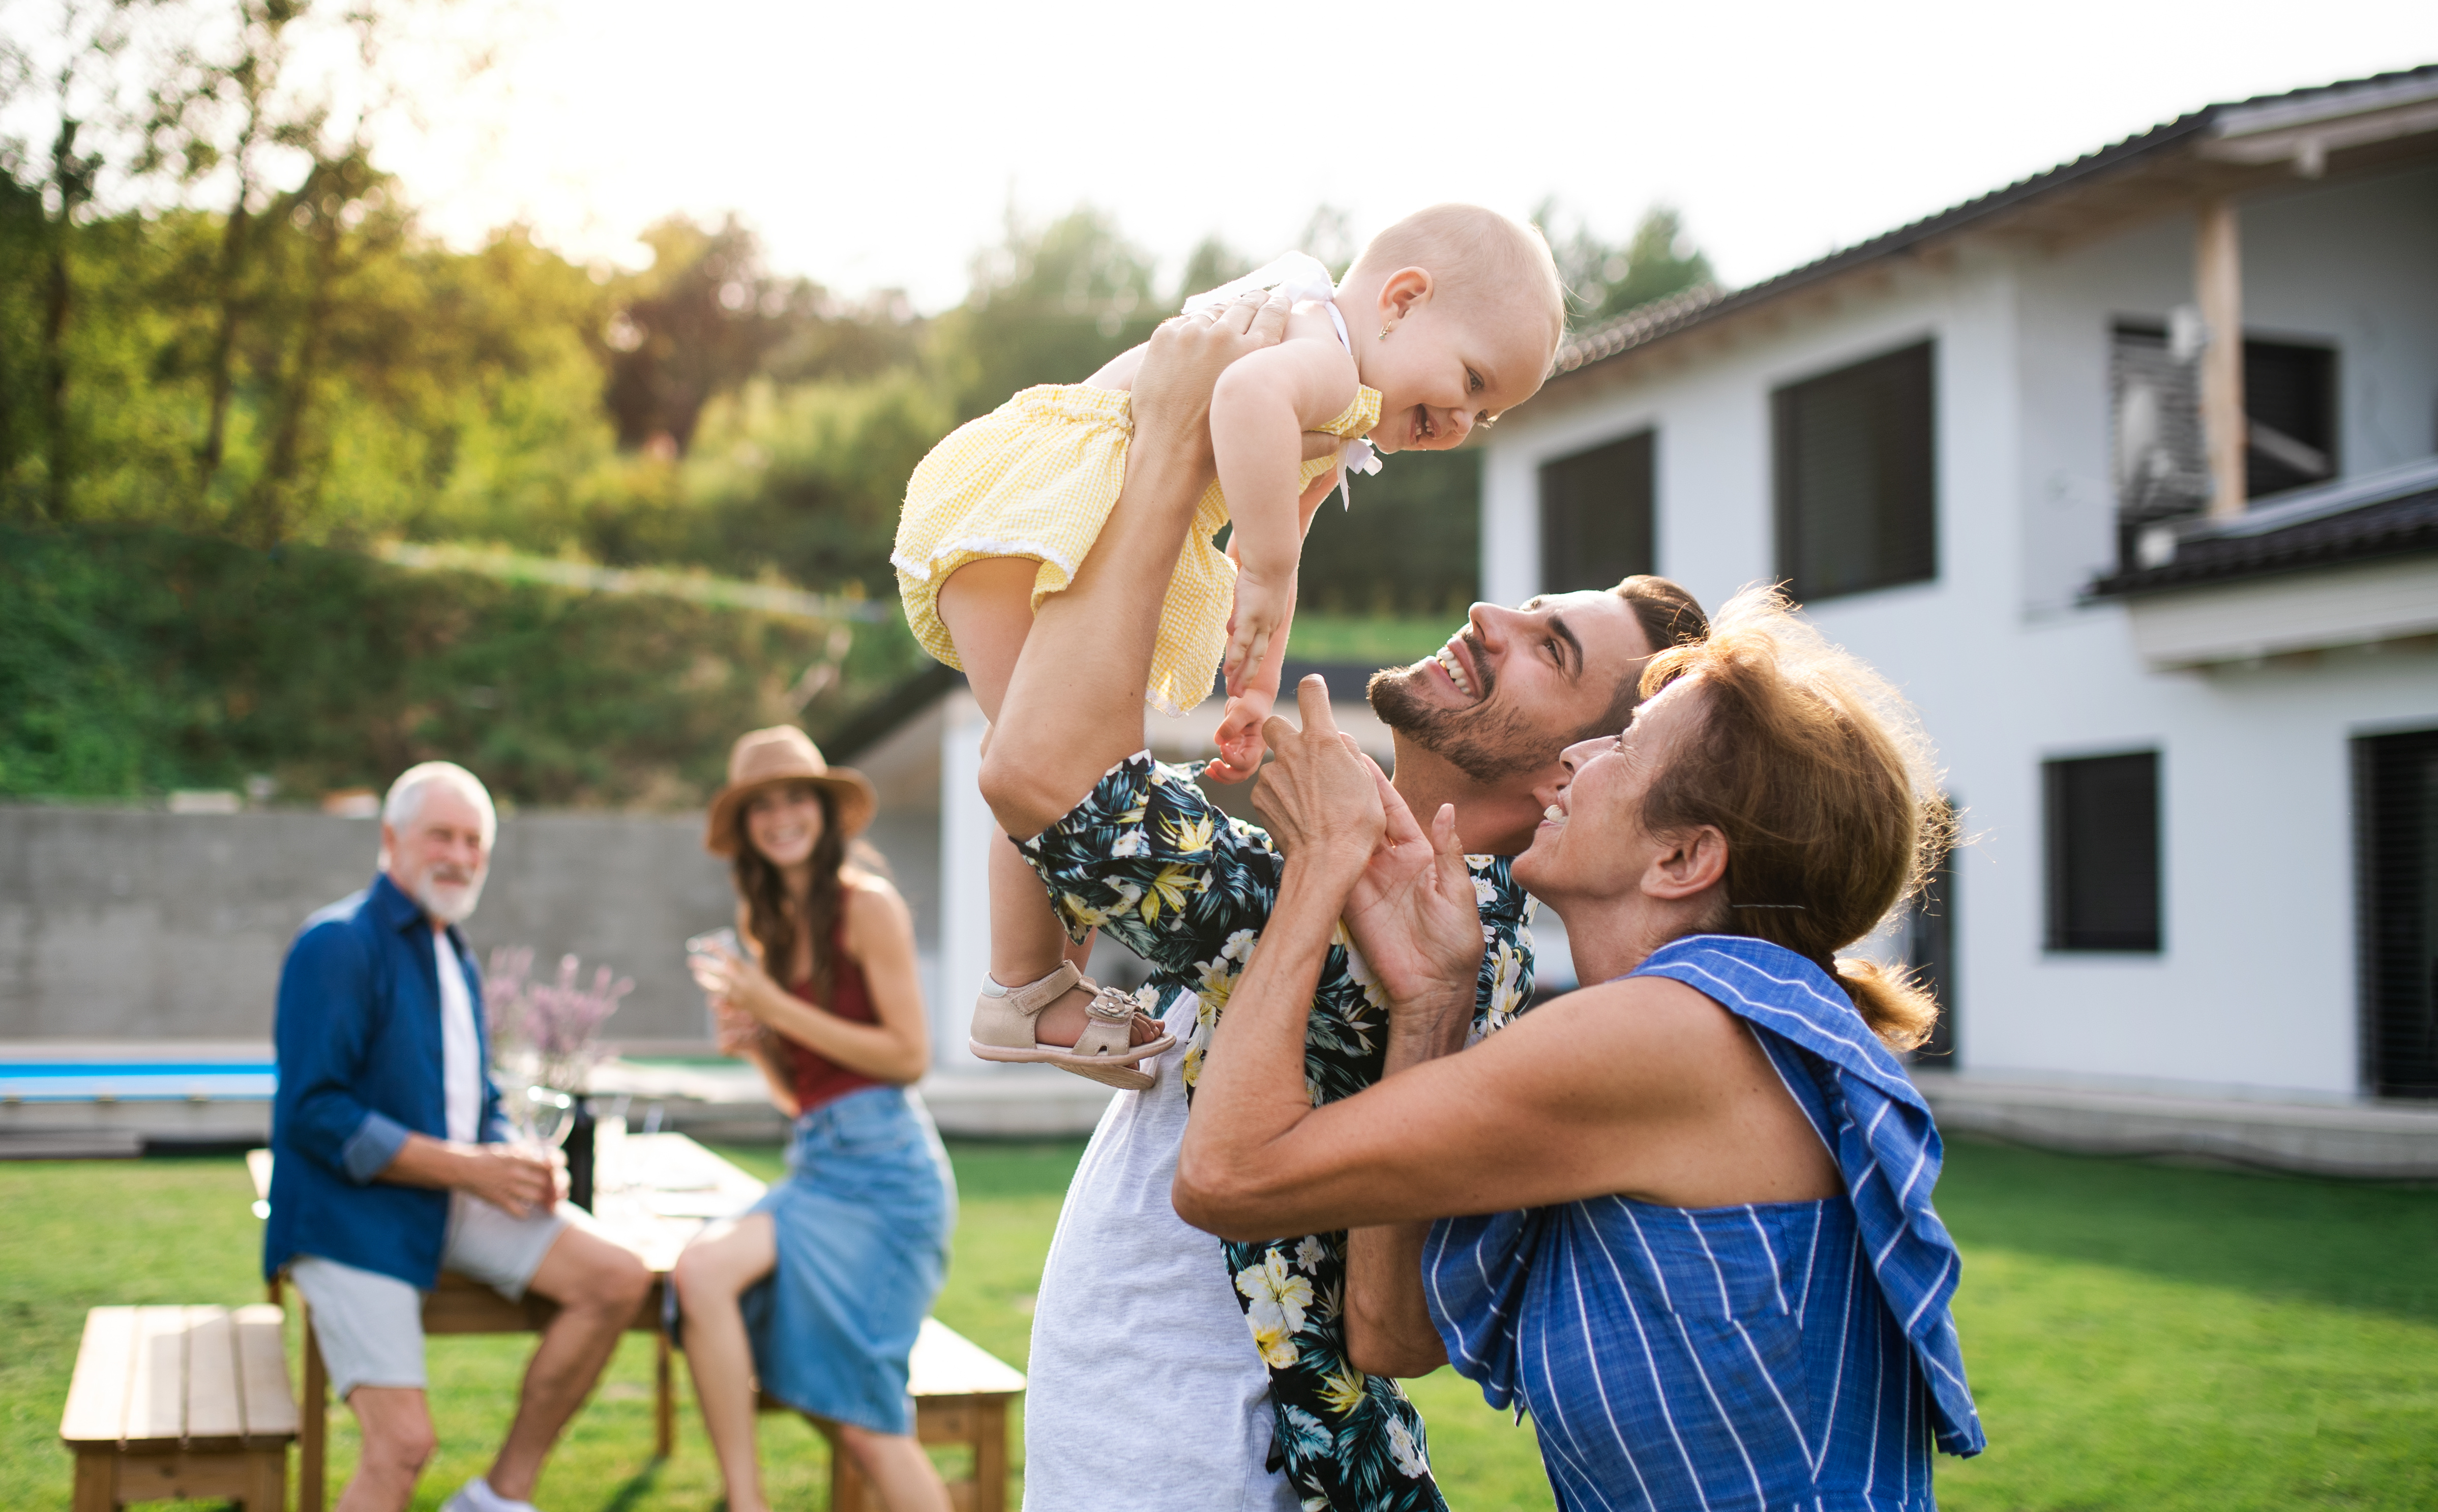 A family is in a backyard. Older family members are less clear in the background of the photo, while younger parents are holding up a young child